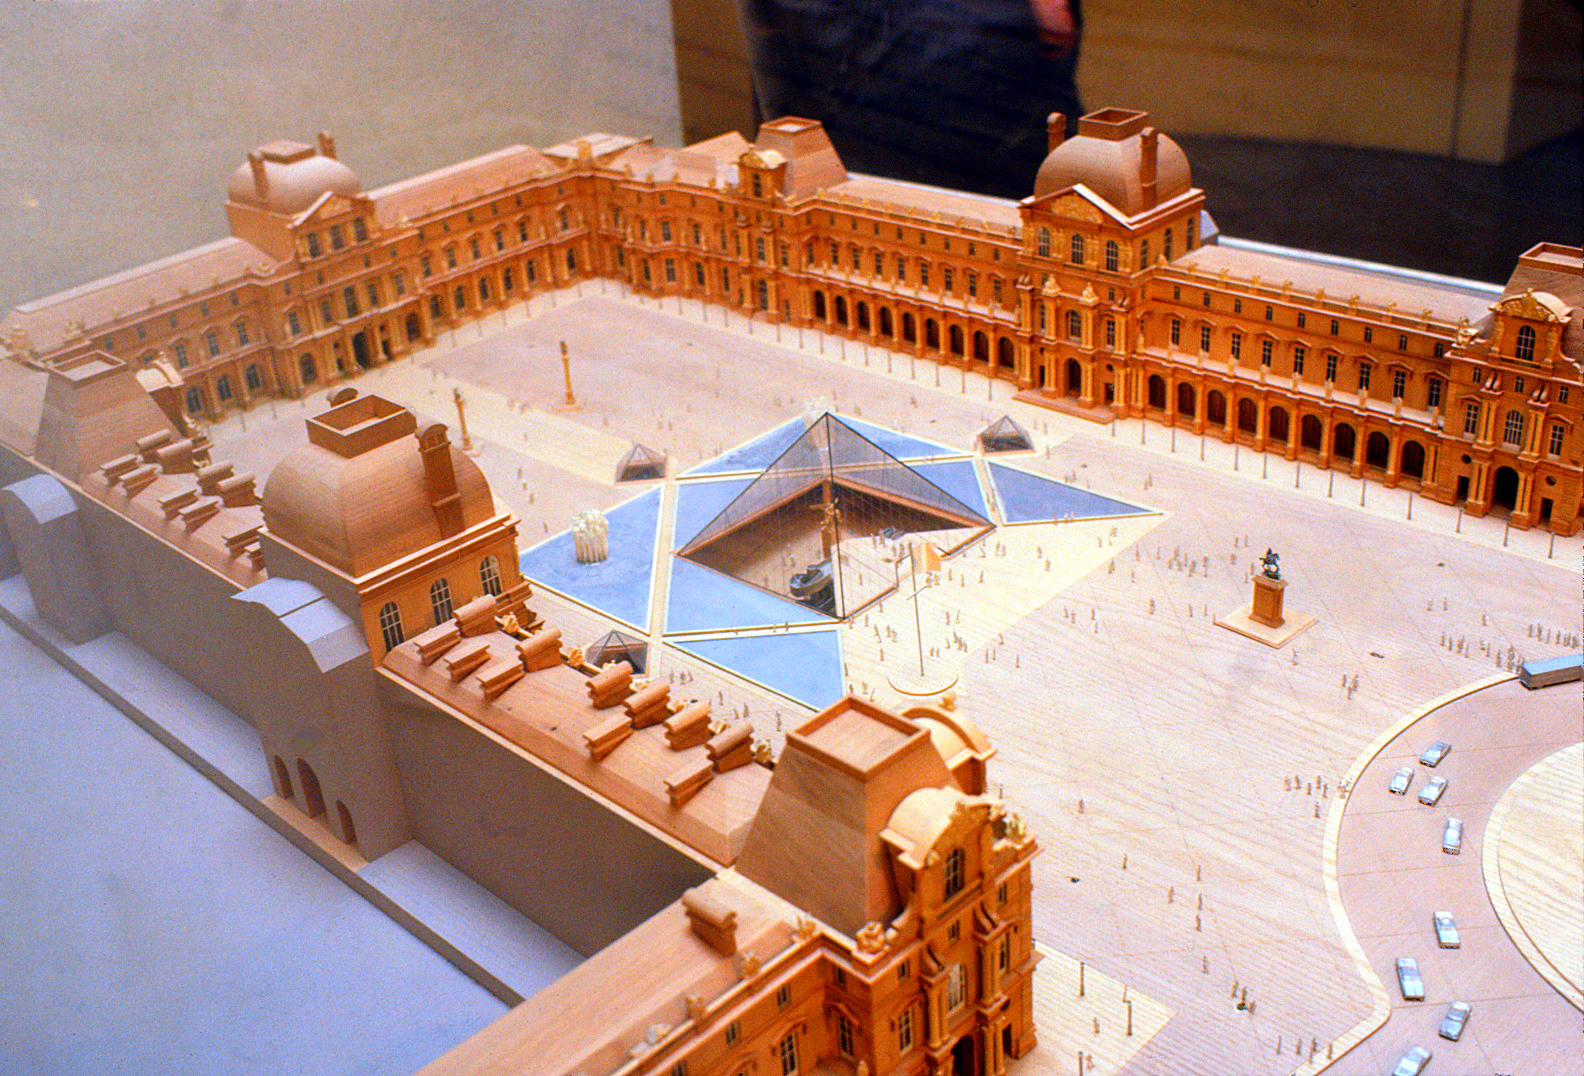 Aerial view of the model built of the Louvre Museum.